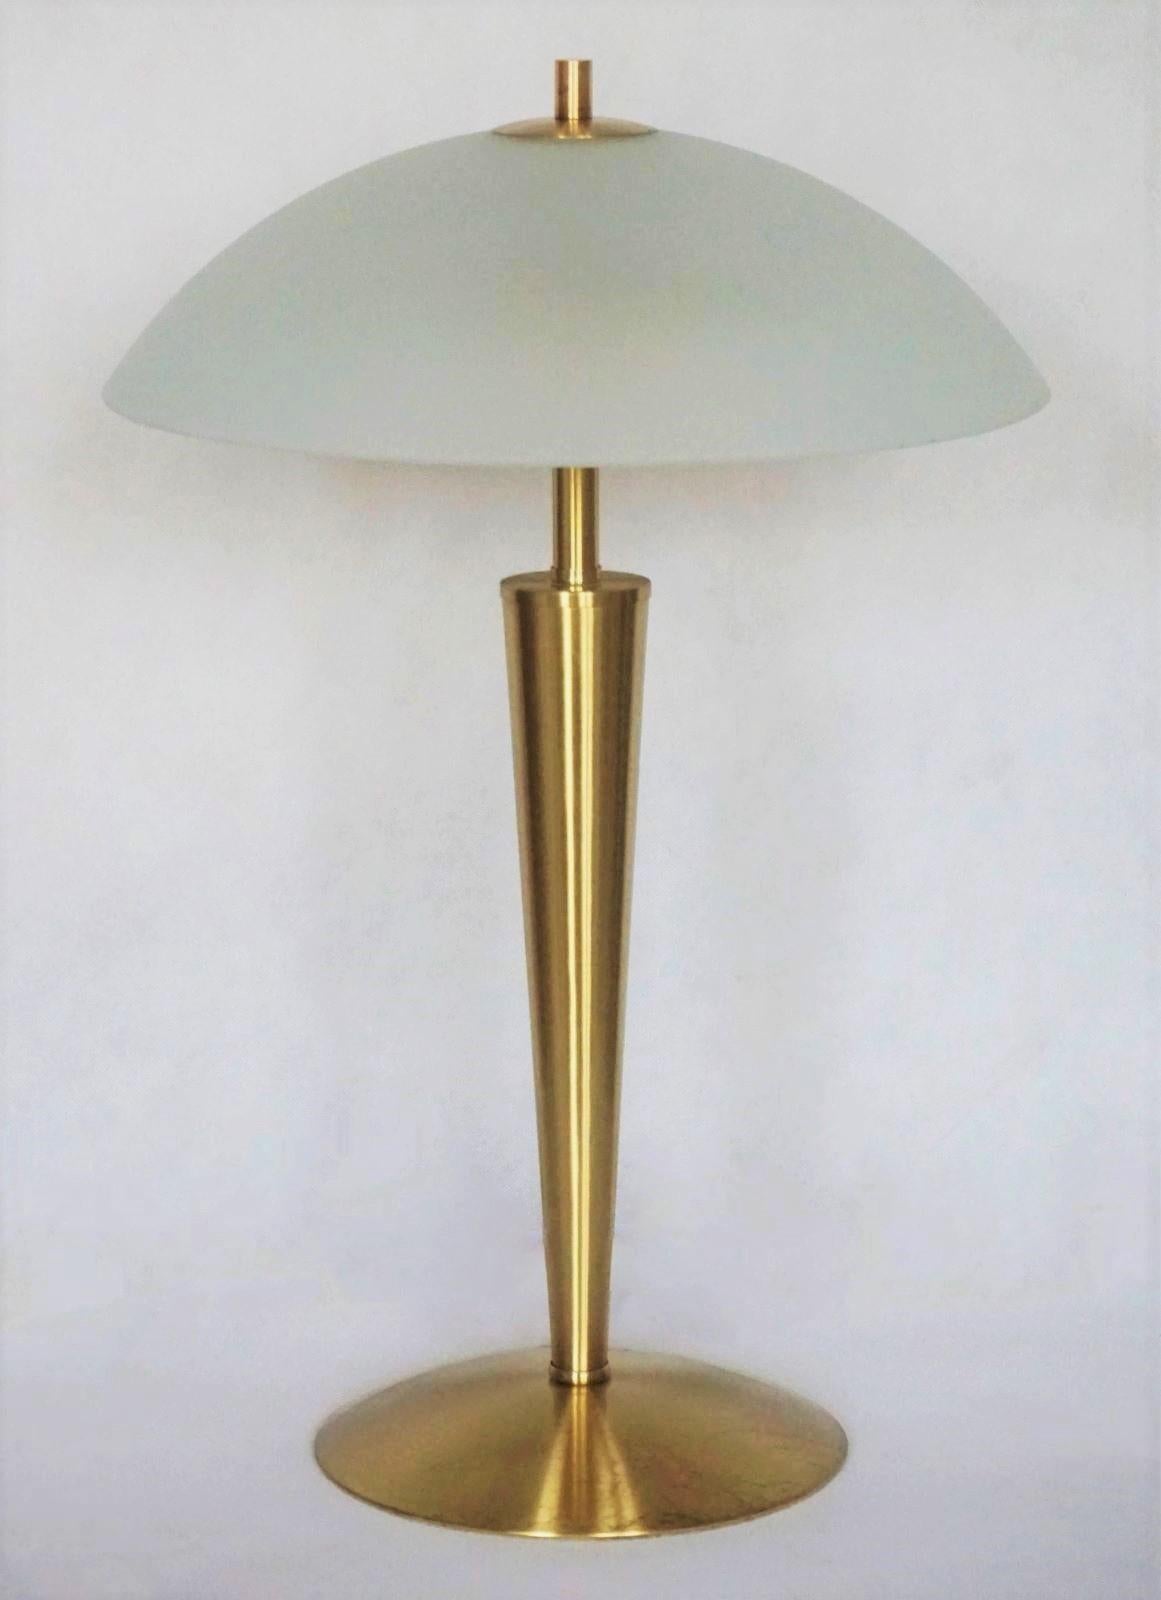 Bauhaus two-light table lor desk Lamp, Germany, 1960s. These high quality table lamp is of chased brass with satin finish glass shade. 
Thsi lamp is fully functional and in good condition, 
It takes two E14 light bulbs. 
Measures: Height 19